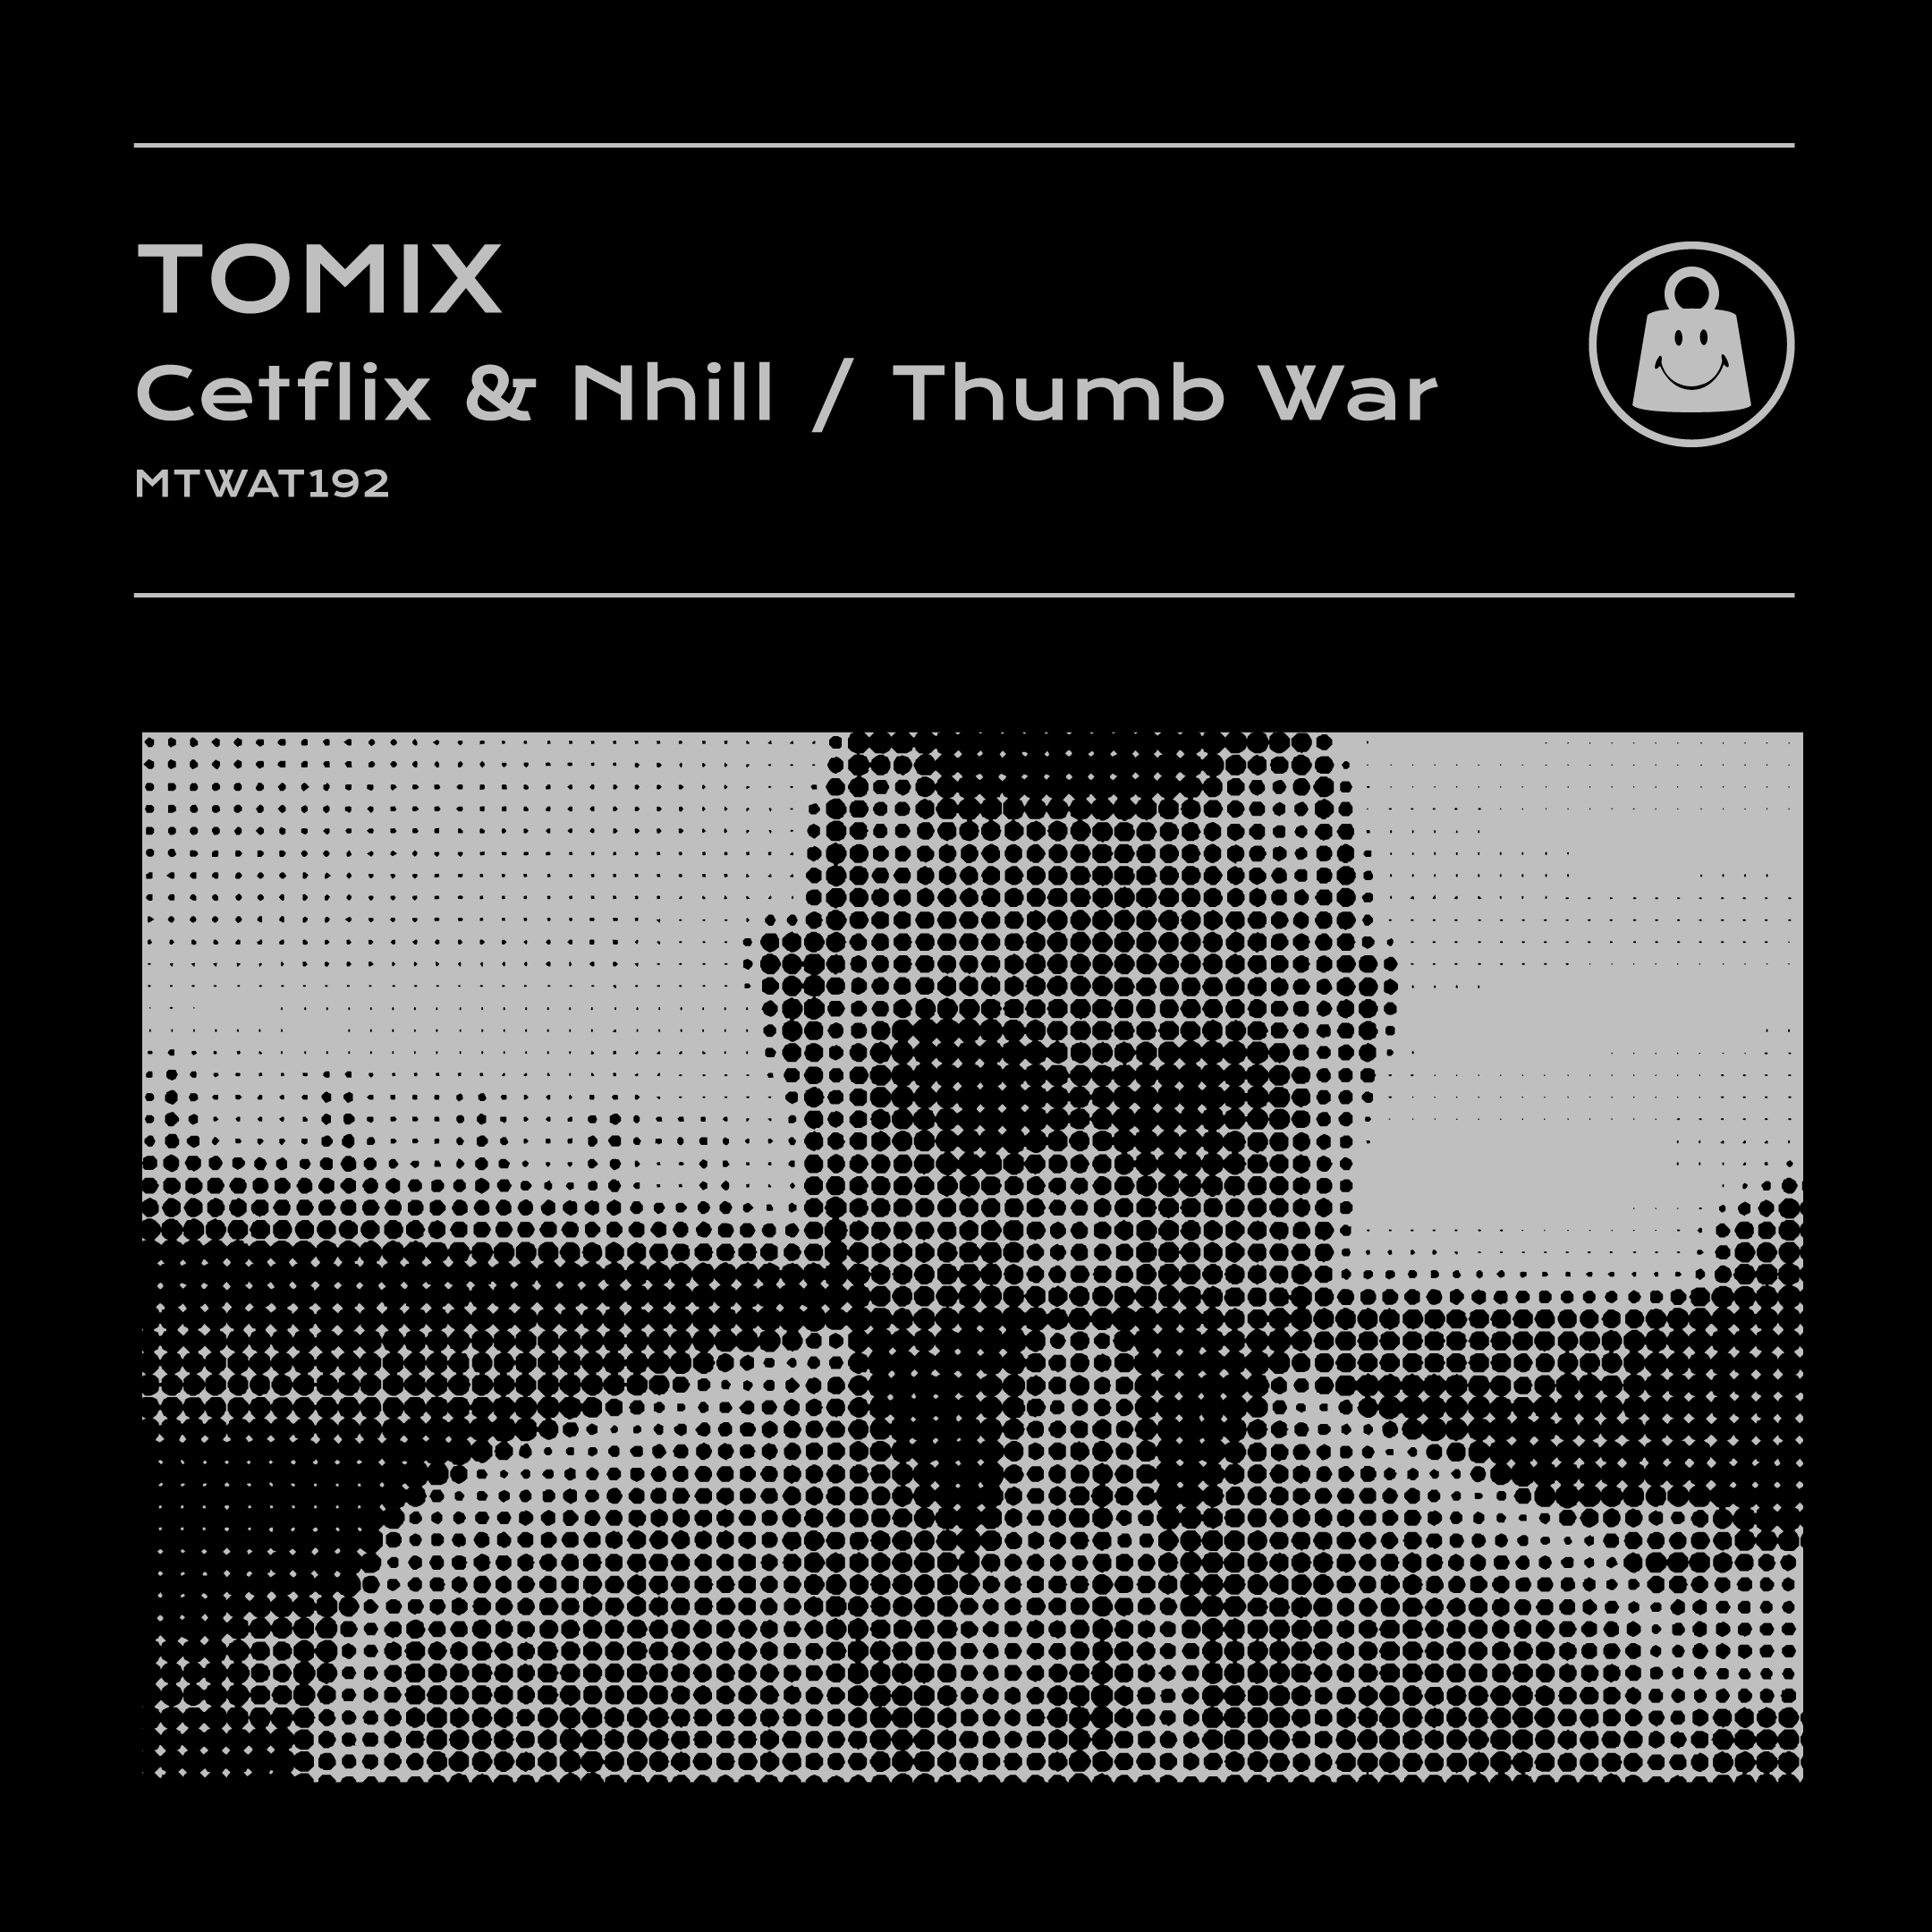 Artwork for 'Cetflix & Nhill / Thumb Way' an EP by ToMix, including a black & white picture of ToMix.